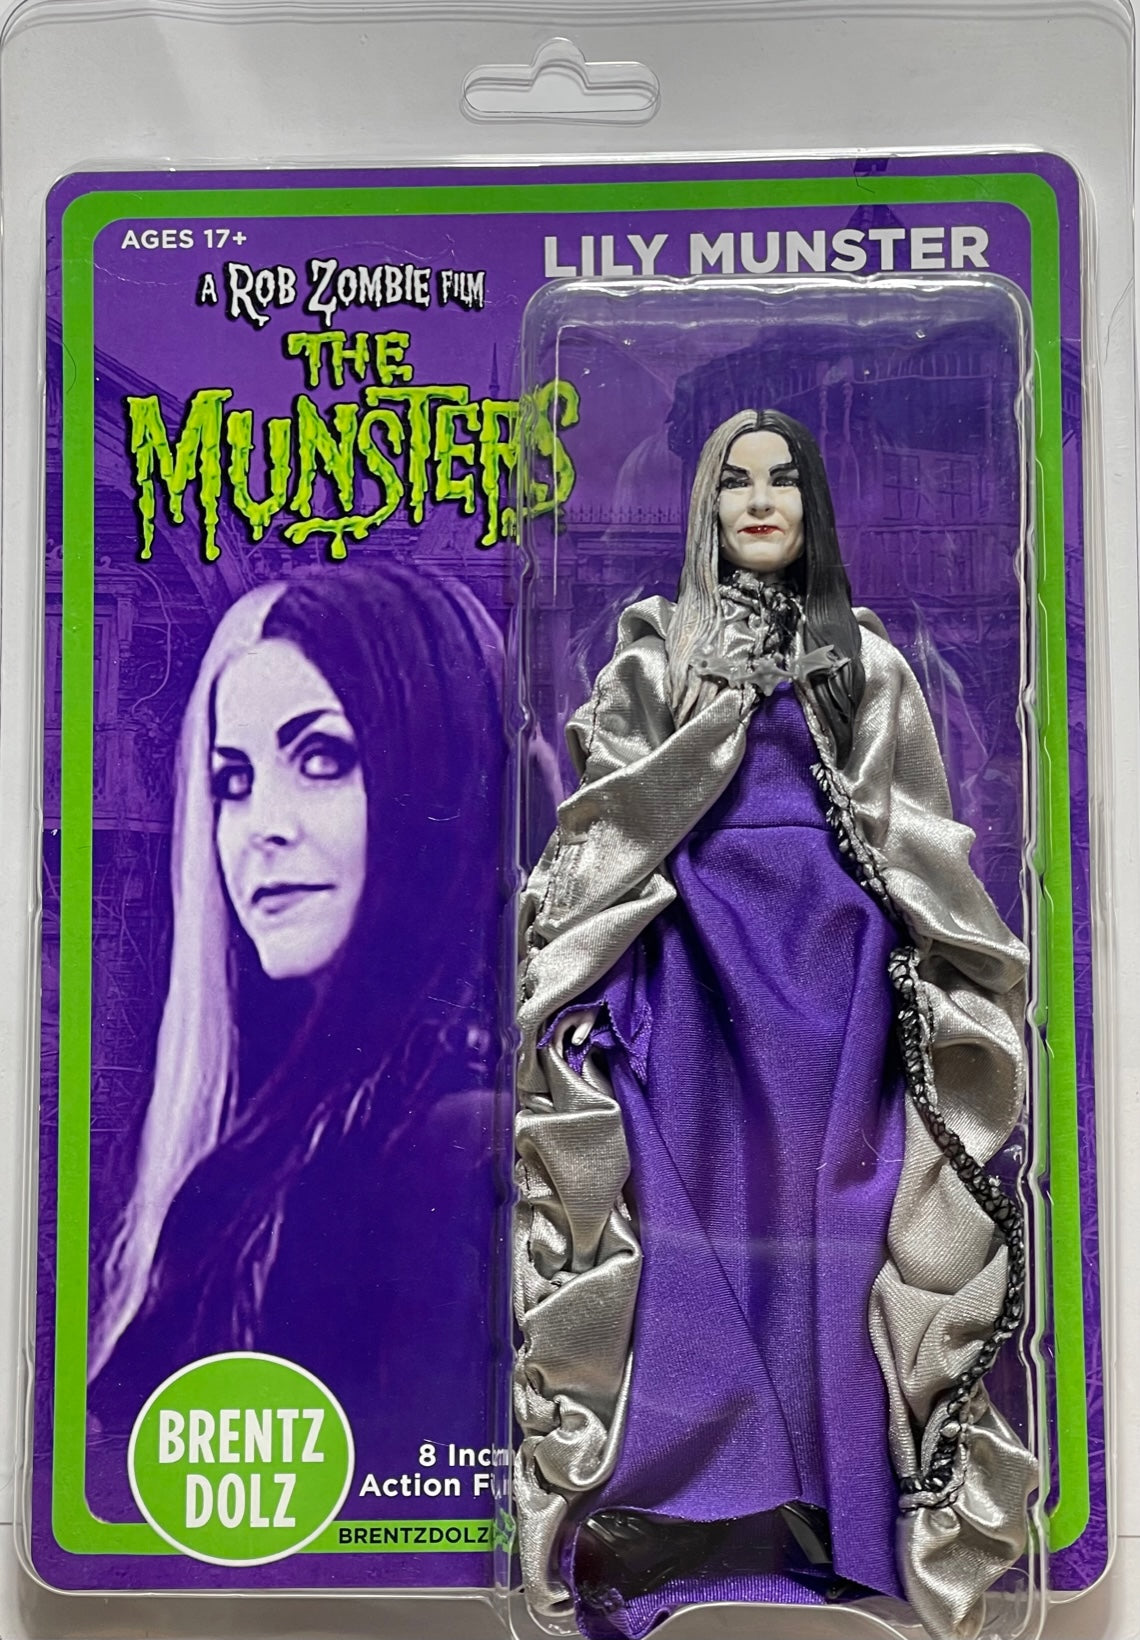 Brentz Dolz The Munsters (2022 Movie) - Lily Munster 8" Action Figure